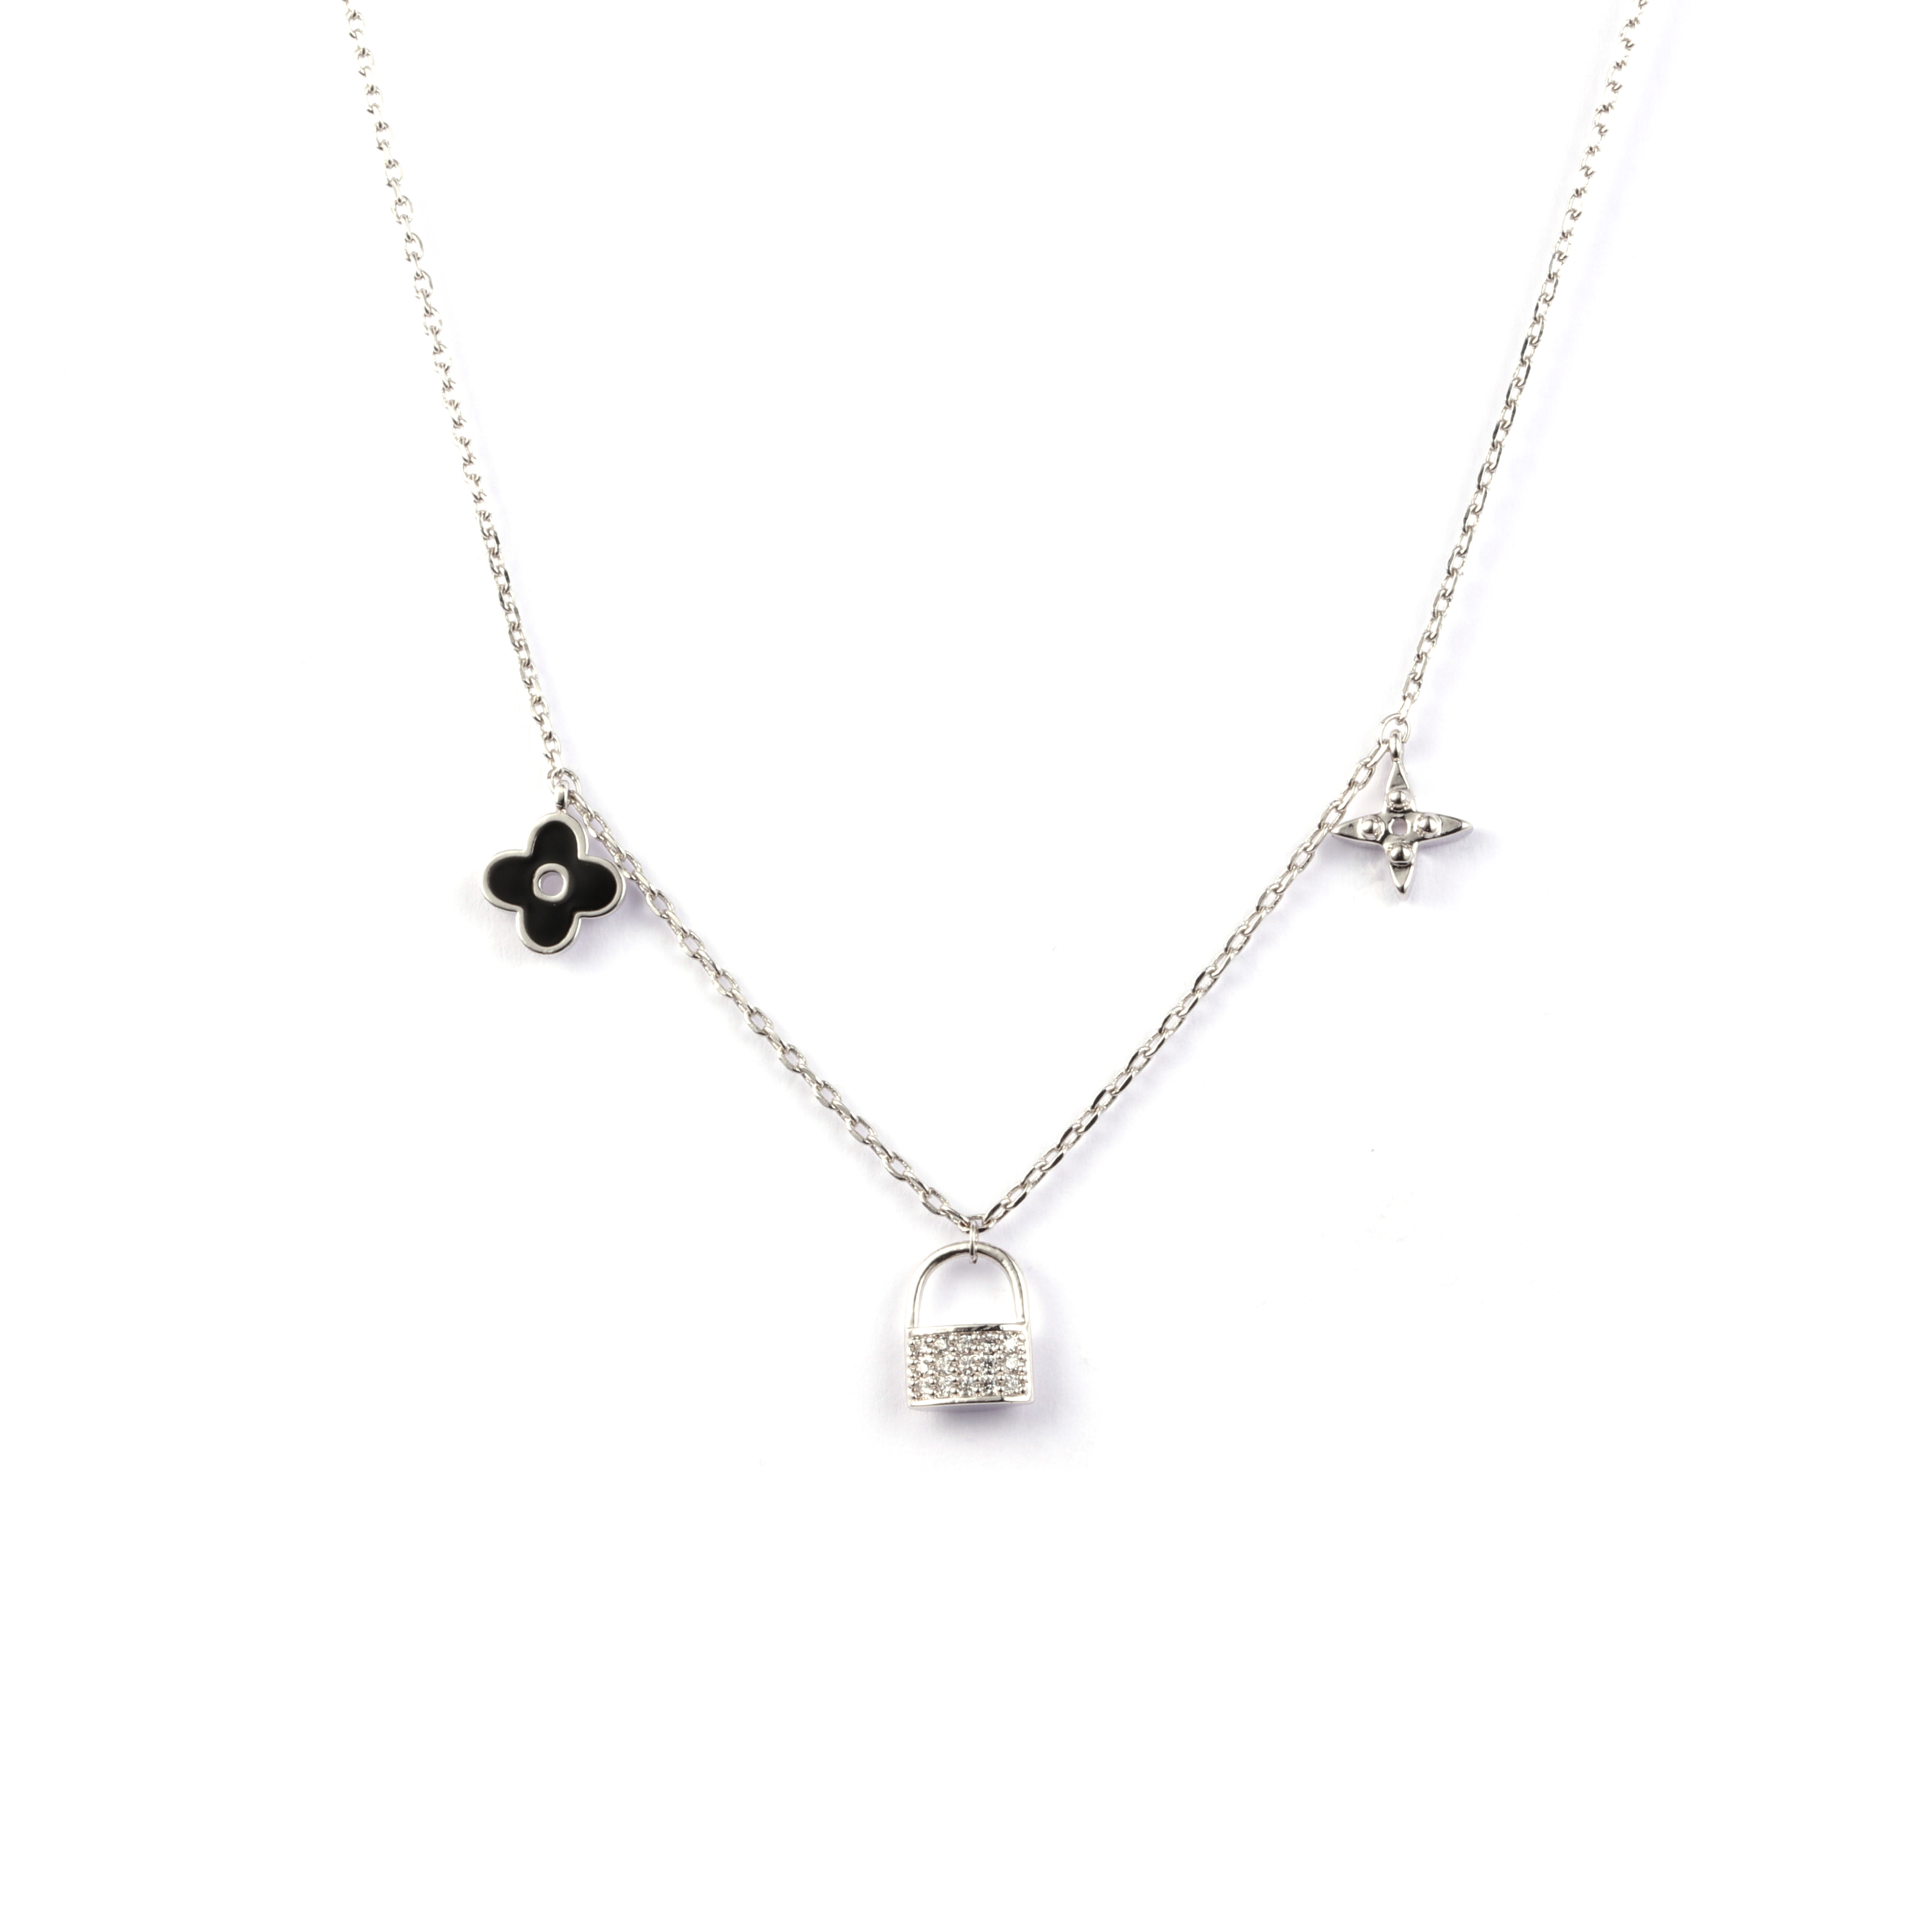 Flower Lock Star Pendant Silver Chain Necklace